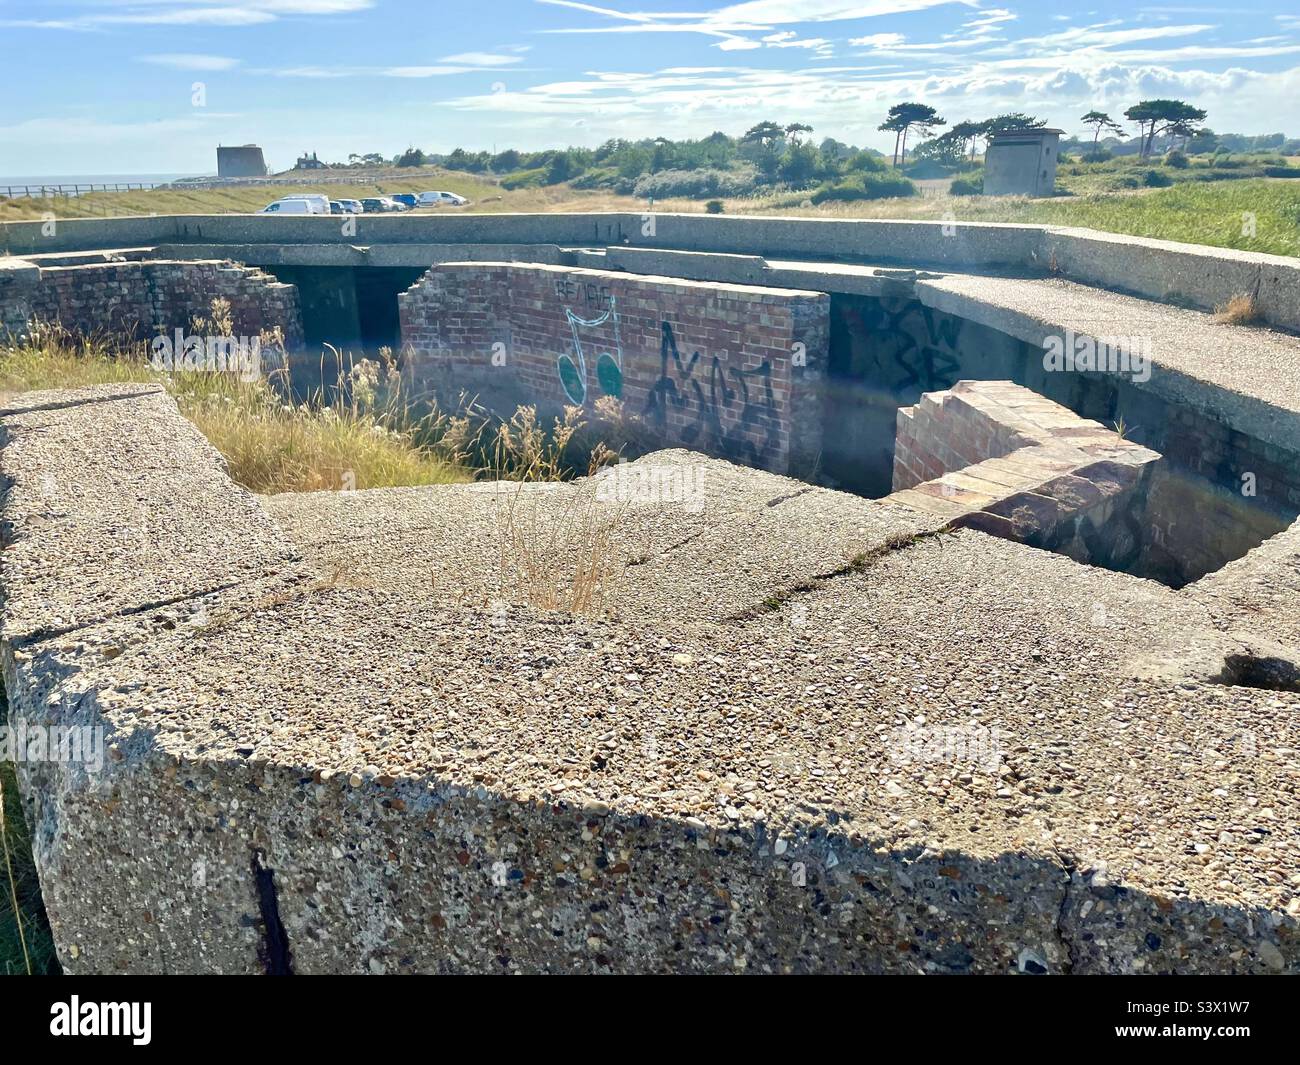 World War 2 bunker with Martello Tower and Observation Tower in background - East Lane, Bawdsey, Suffolk Coast, England, UK. Stock Photo